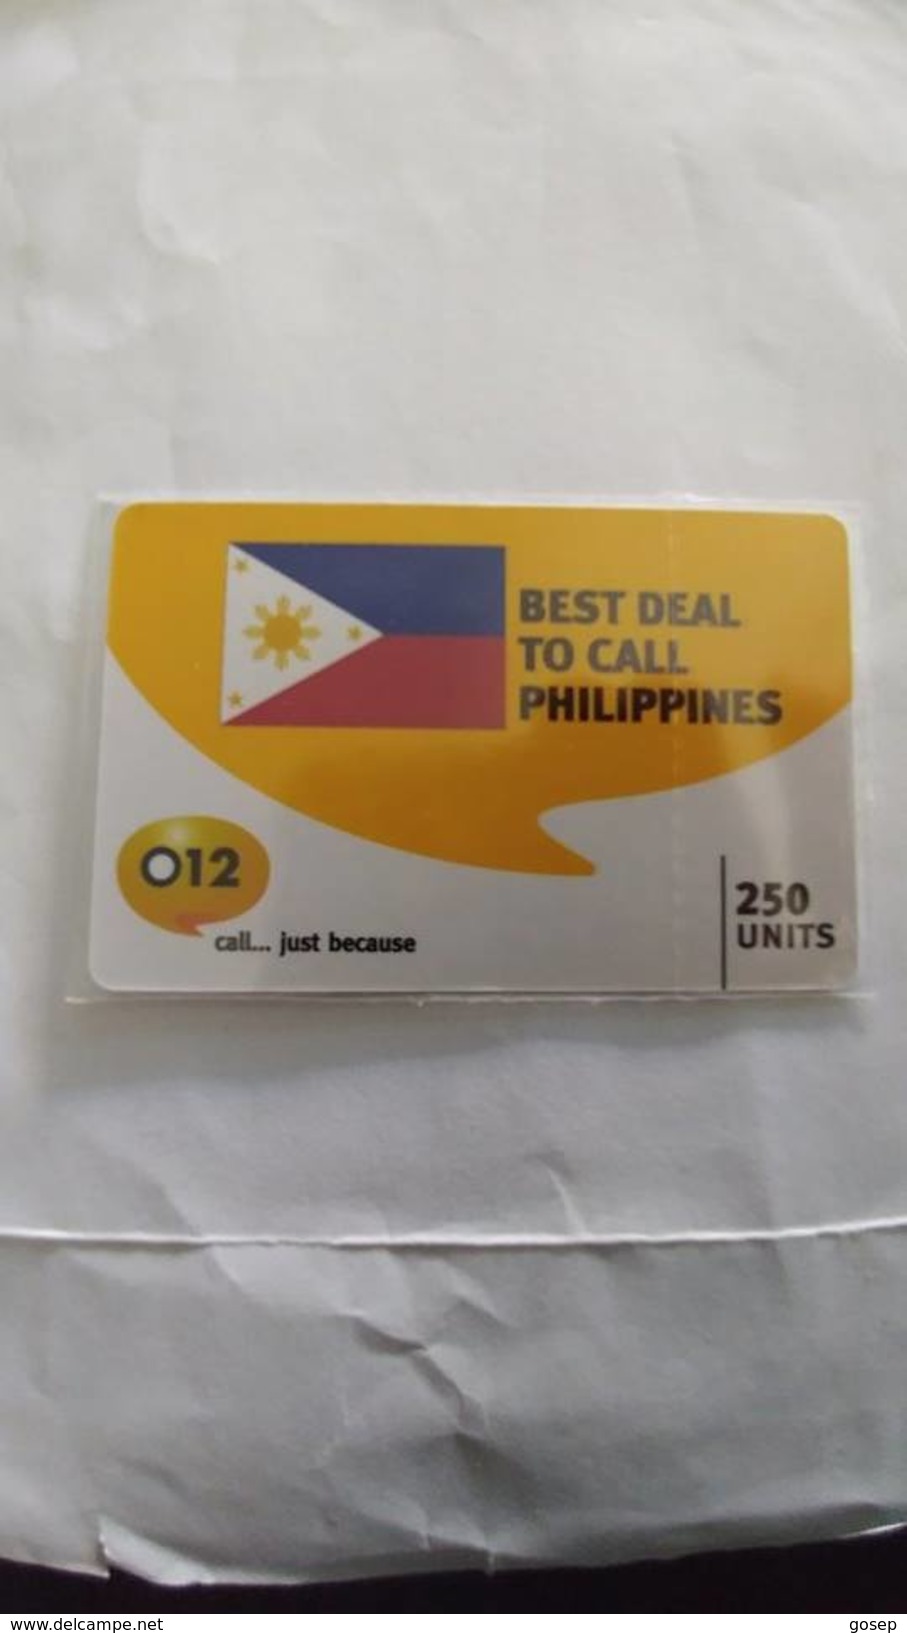 Israel-best Deal To Call Philippines-(1)-zabra-(250units)-(012call Just Because)-(1.5.2008)-mint Card - Filipinas